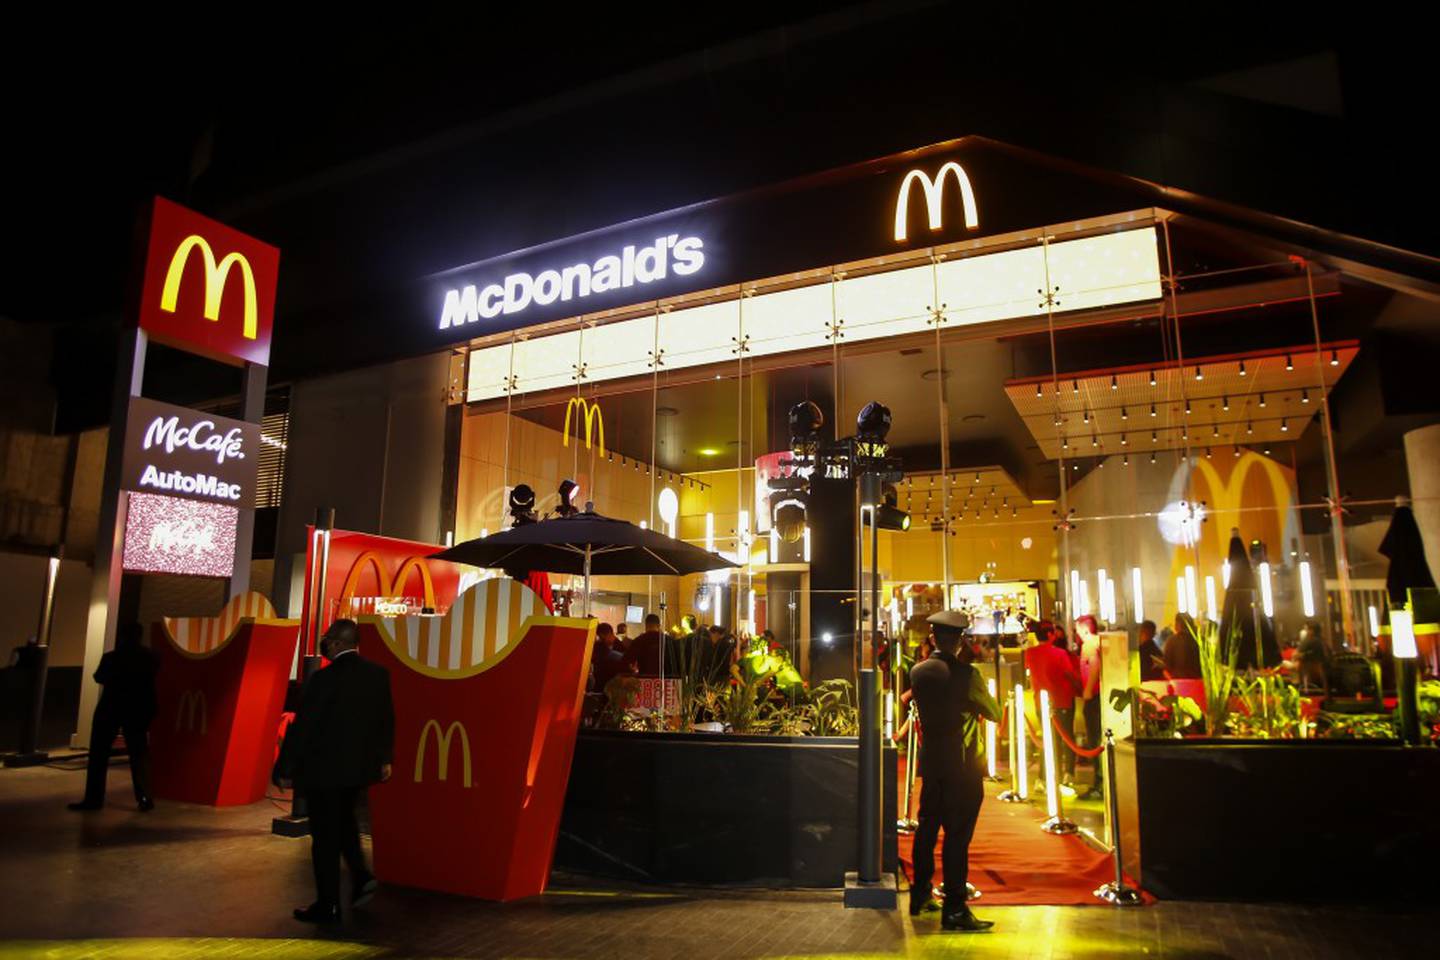 Arcos Dorados and UDT announce the transformation of more than 42,000 masks into trays for McDonald's restaurants